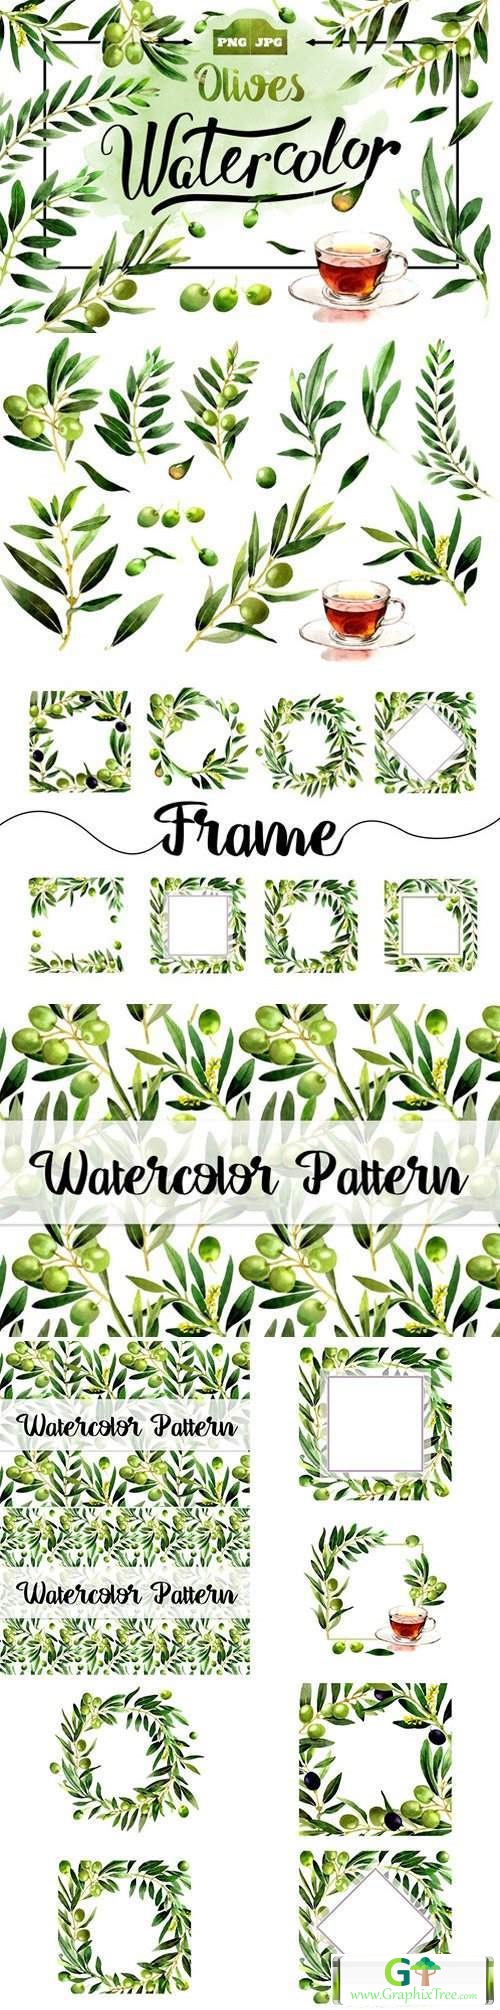 Olives watercolor PNG clipart [Stock Image] [illustrations]